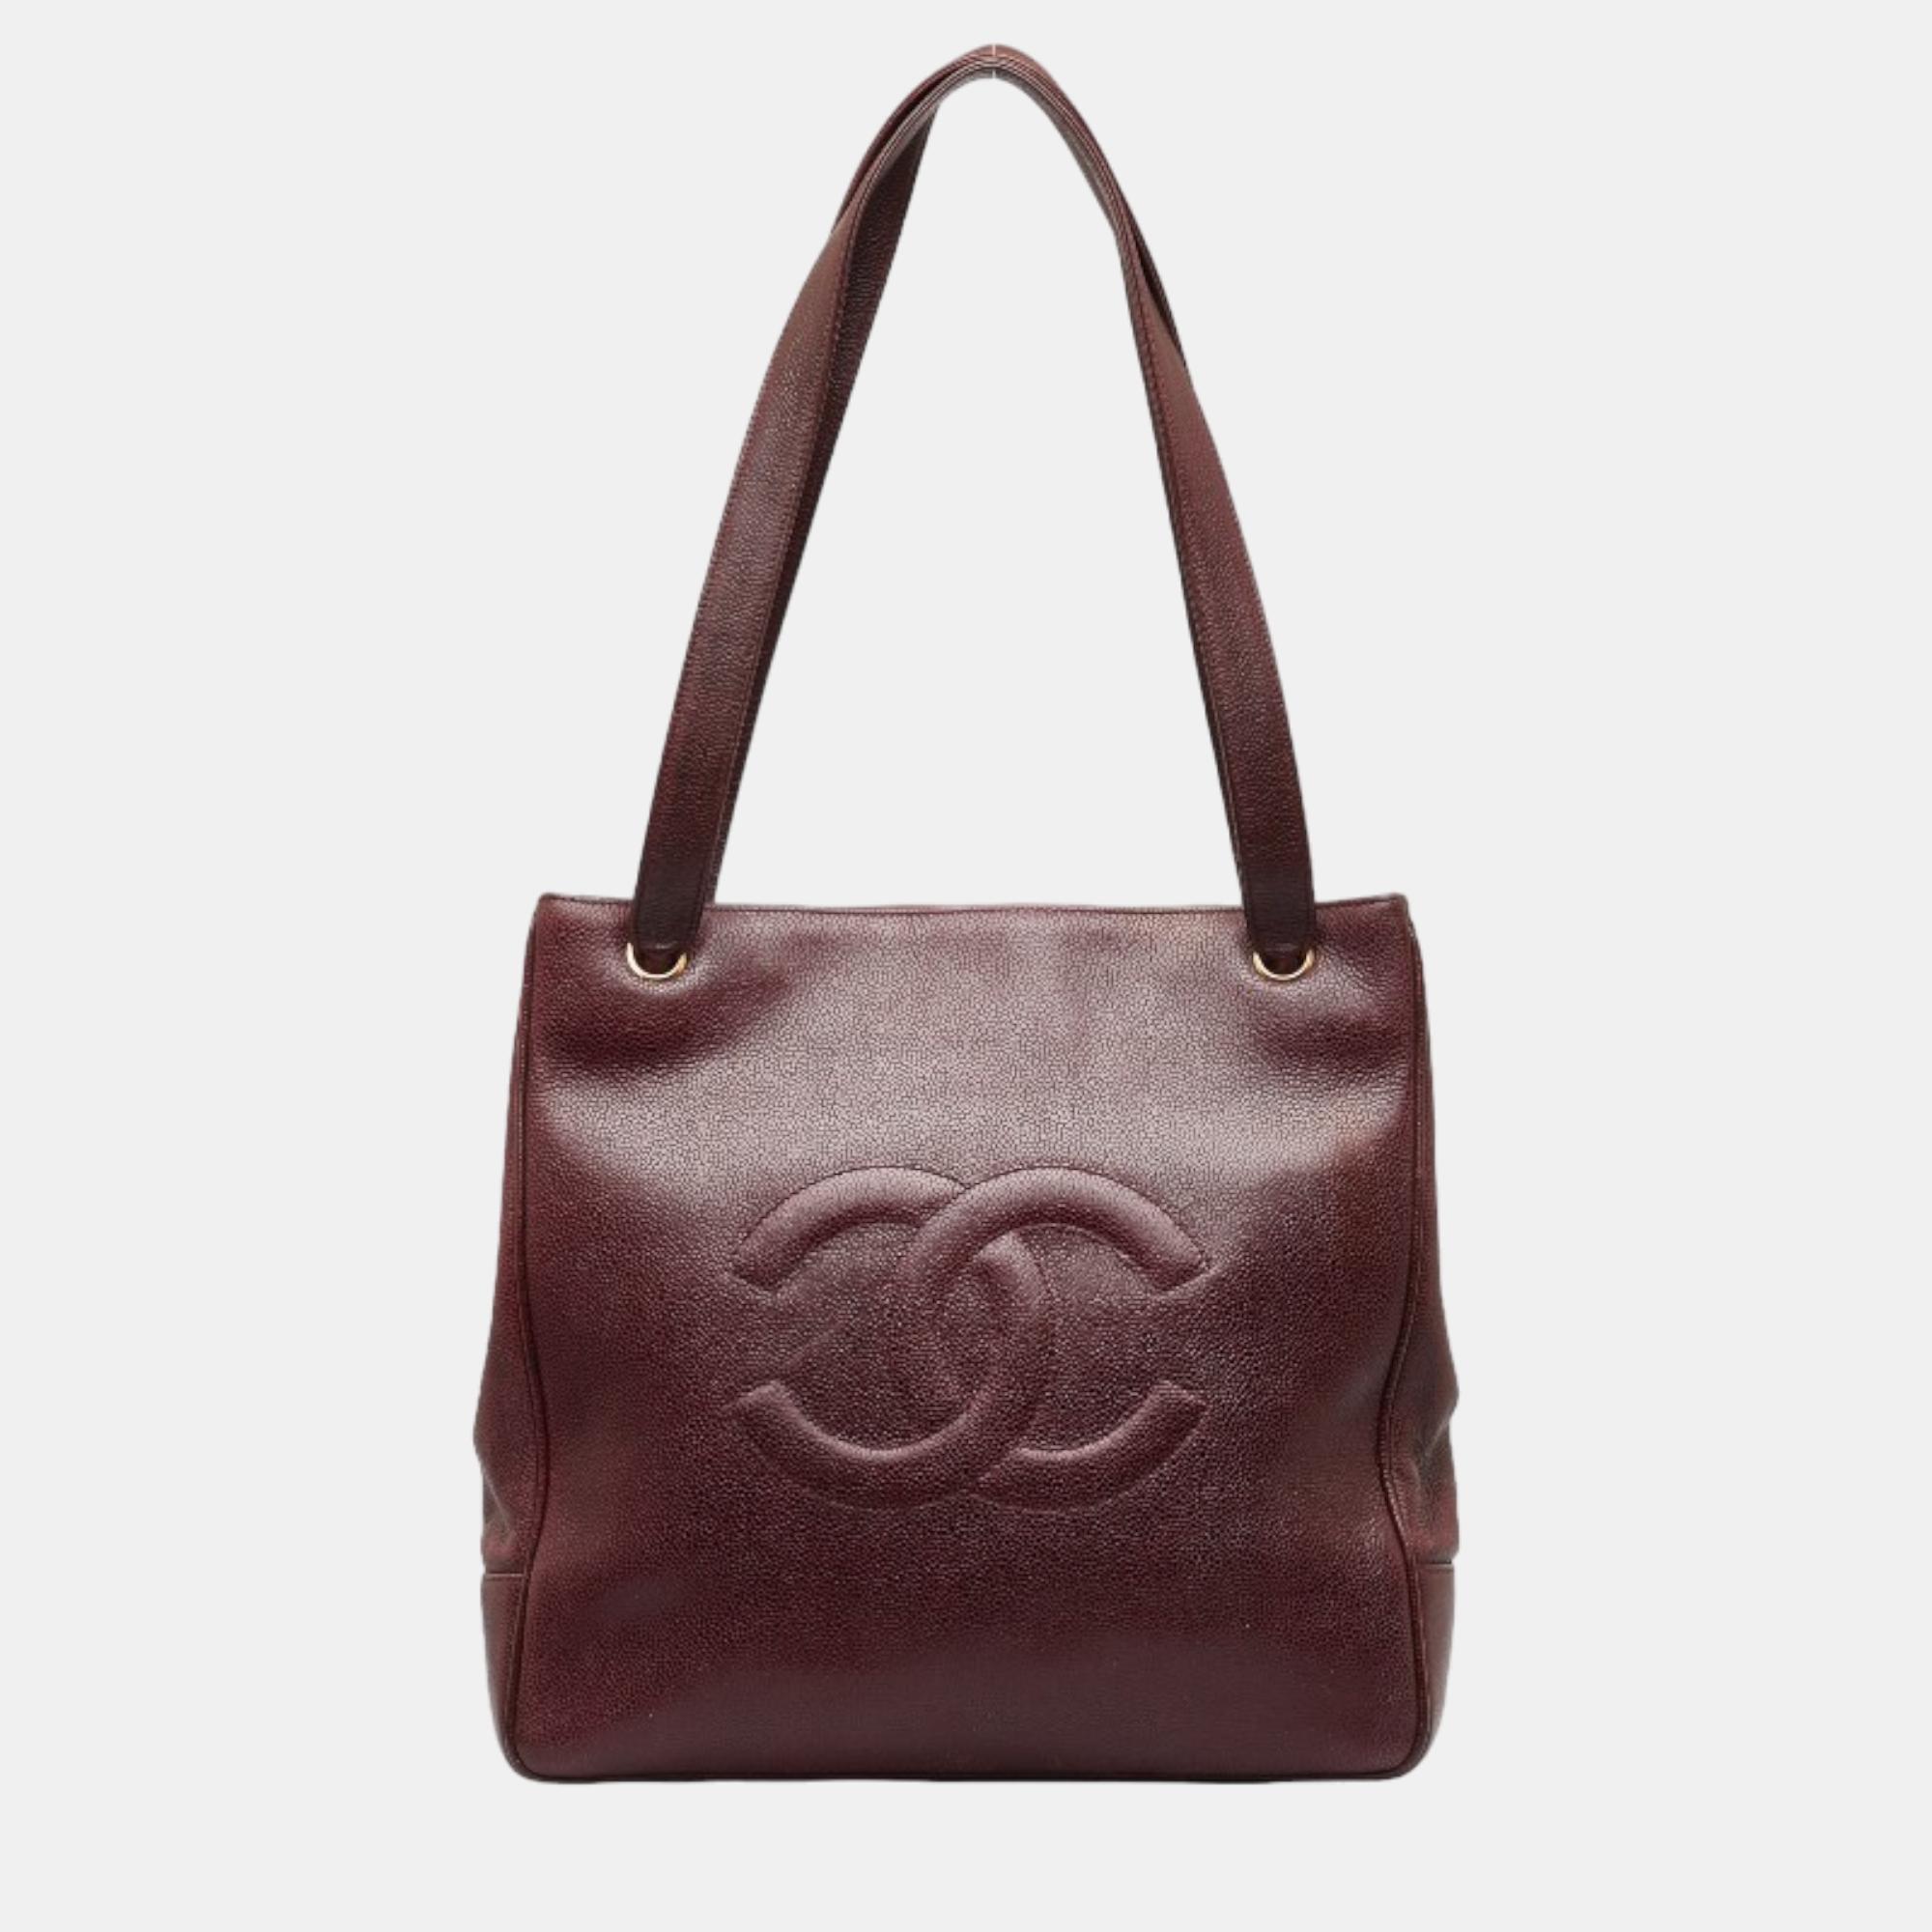 Pre-owned Chanel Burgundy Leather Cc Timeless Tote